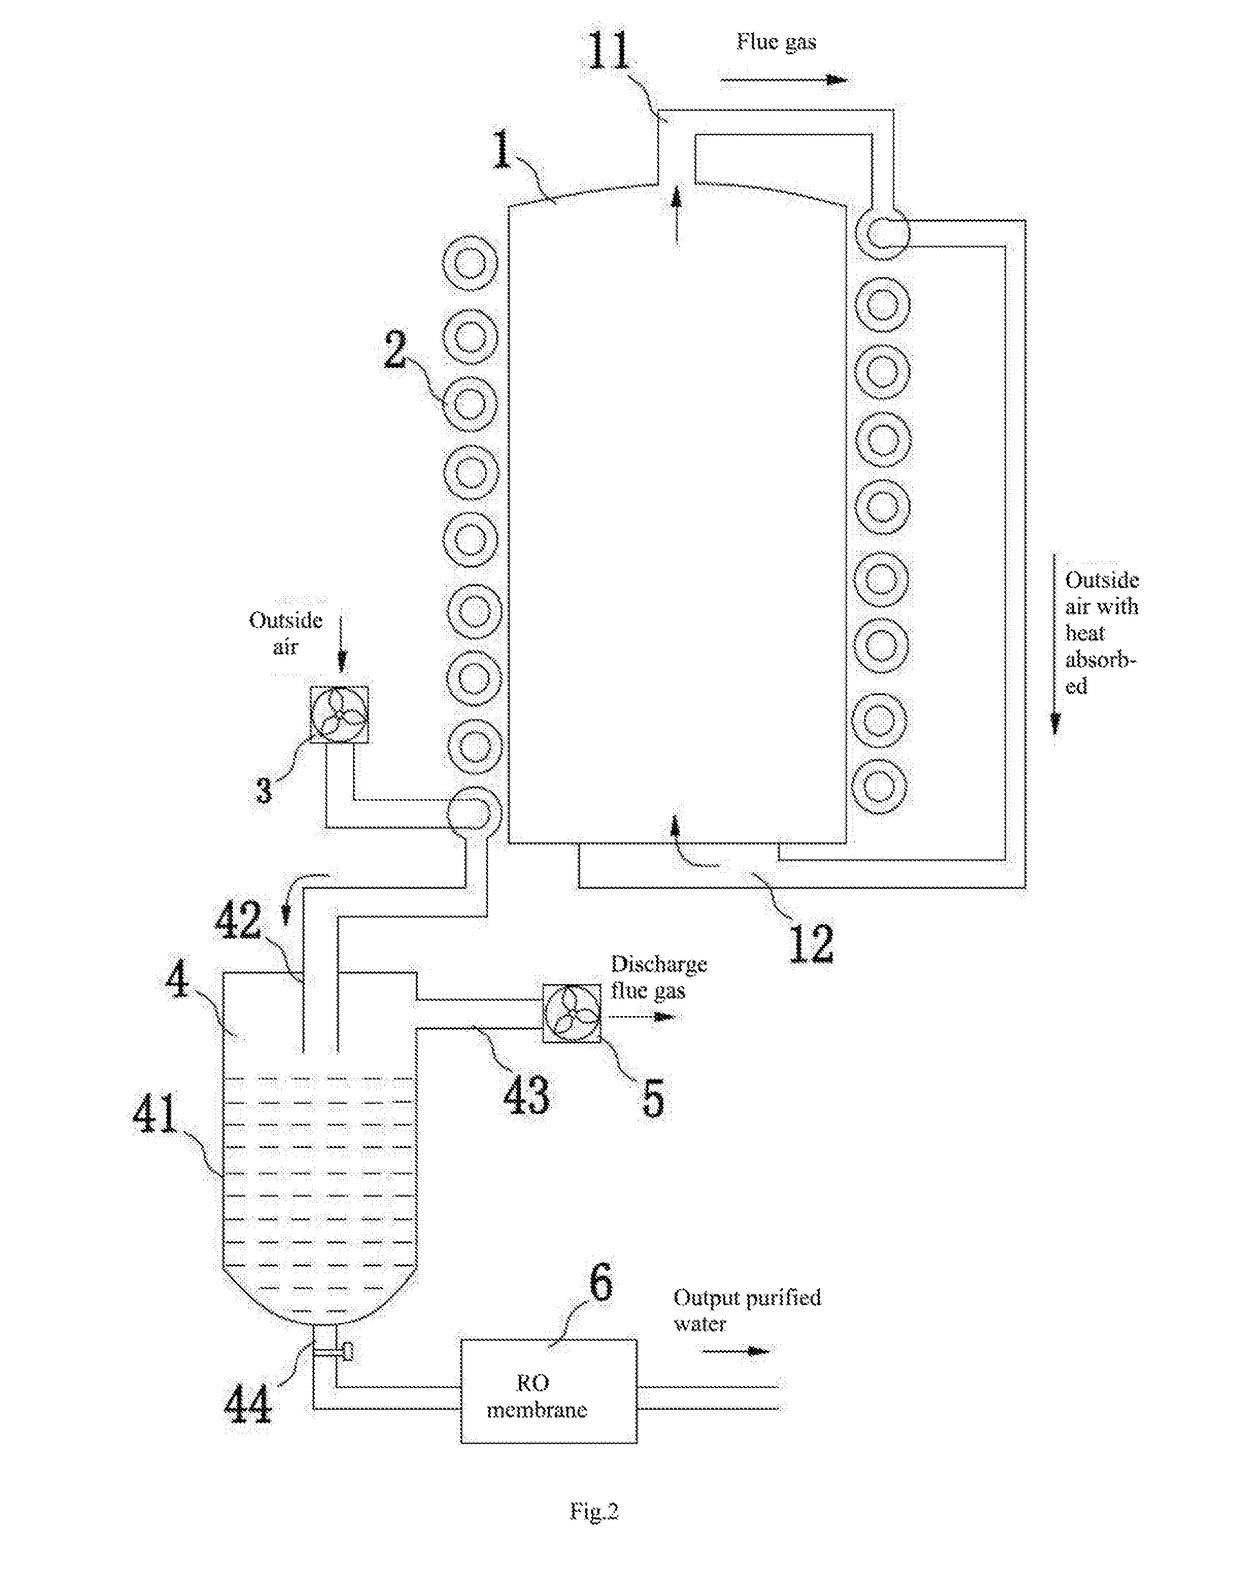 Residual gas heat exchange combustion-supporting system based on methanol-water mixture reforming hydrogen production system, and method thereof